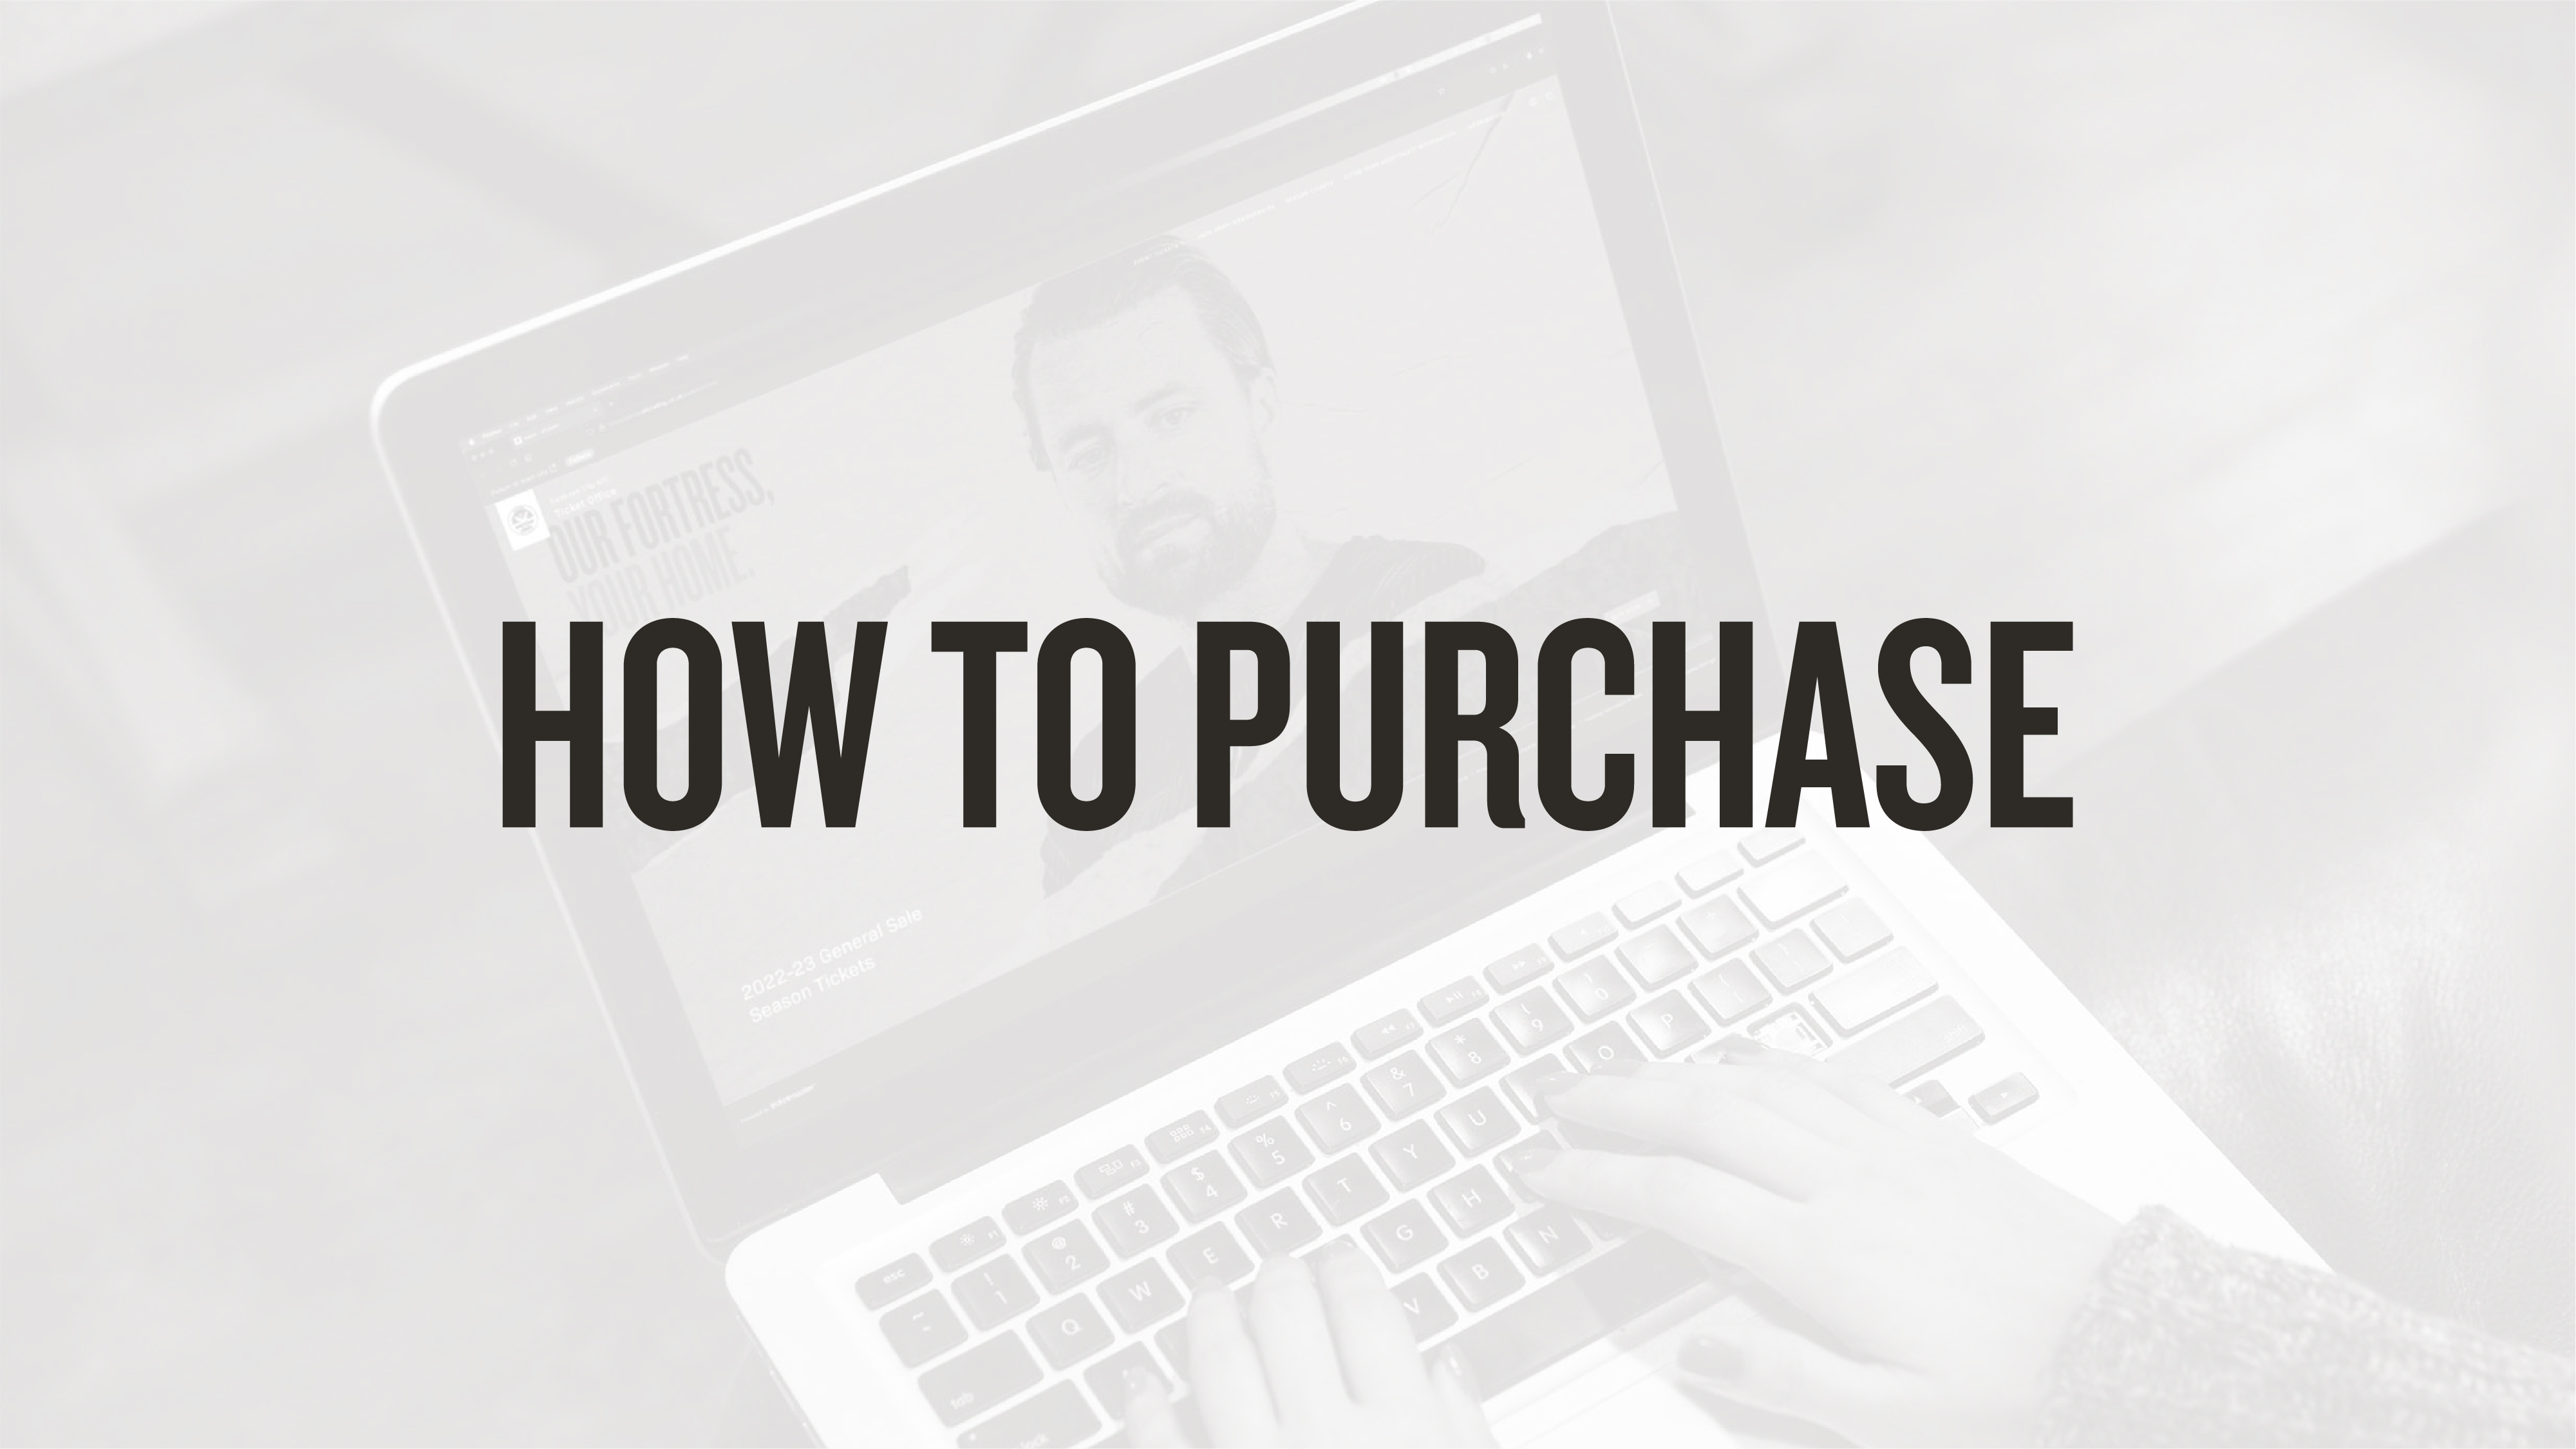 How to purchase